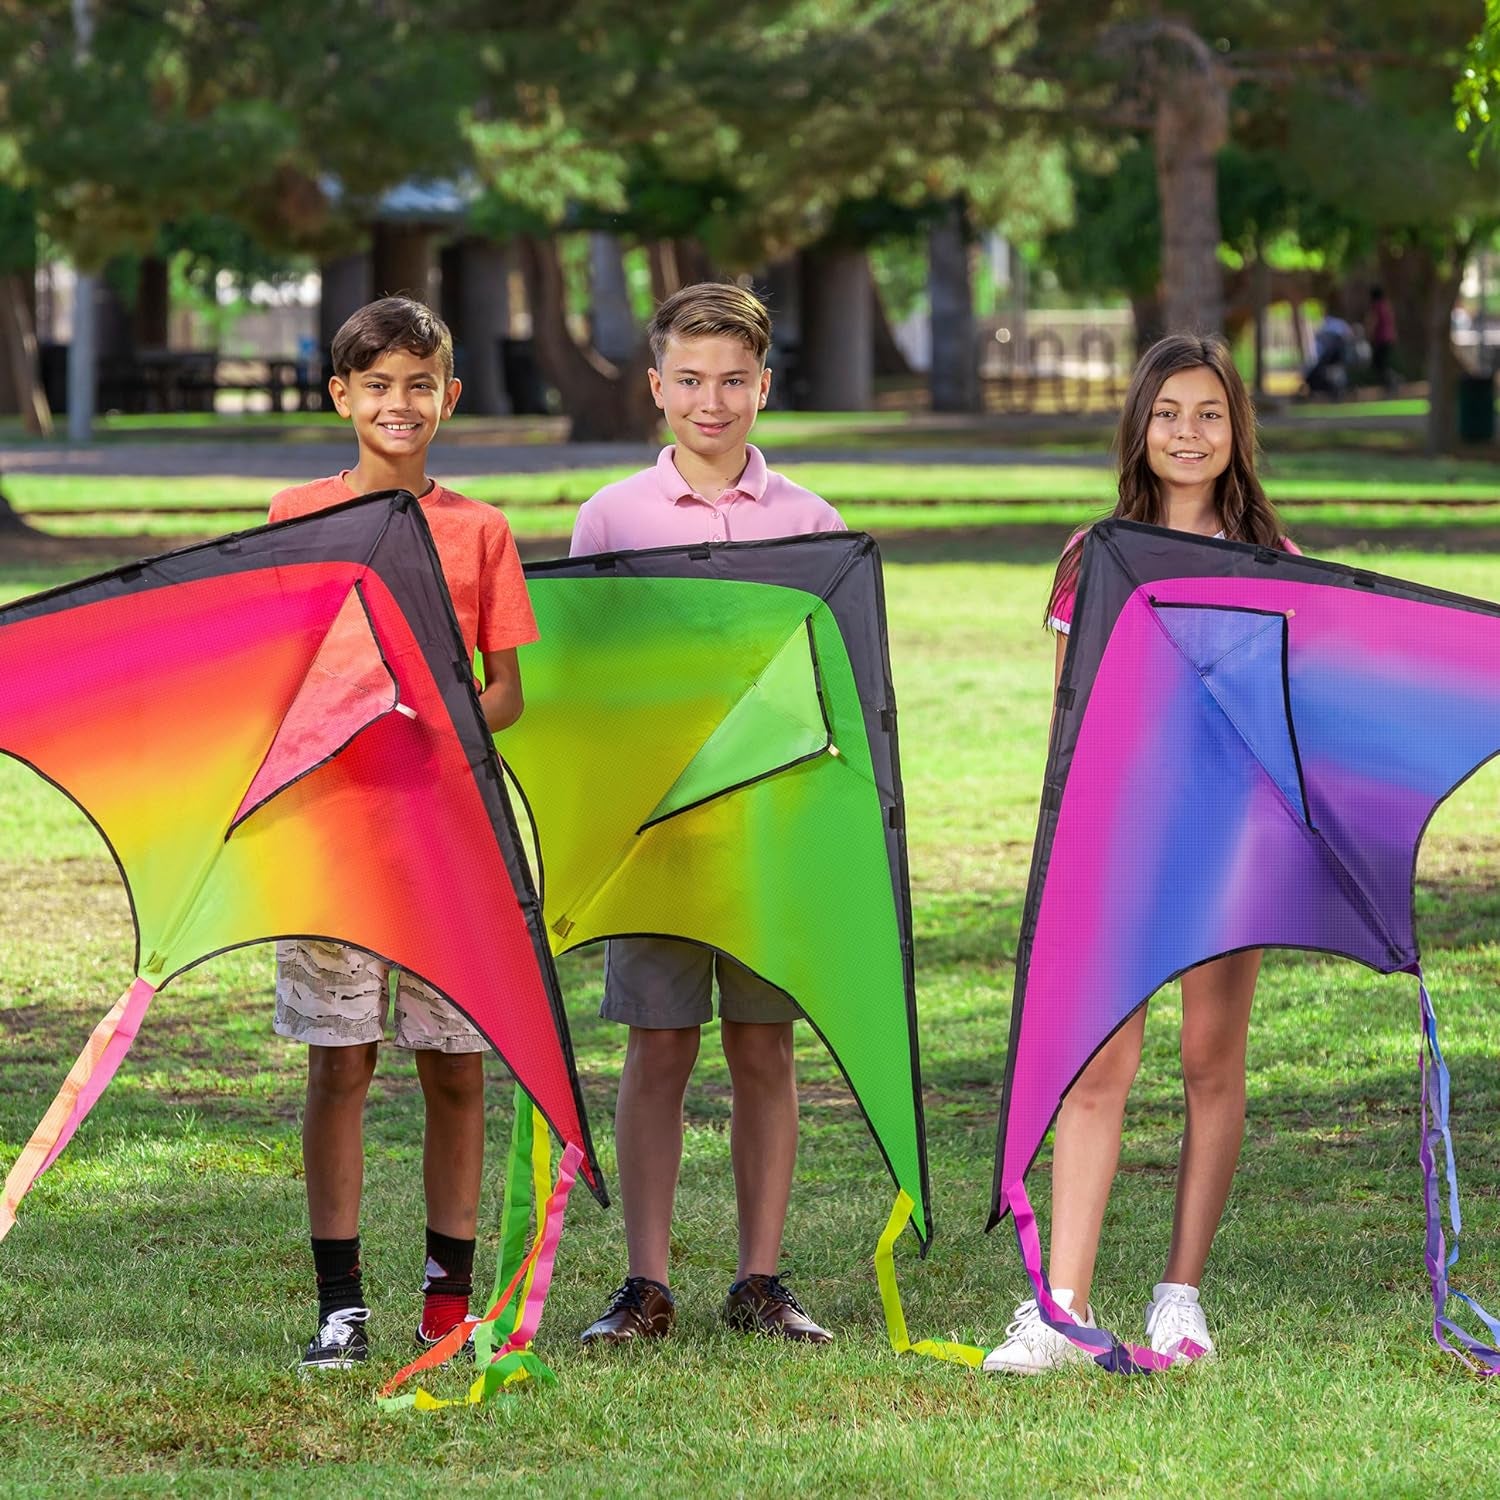 3 Packs Large Delta Kite Orange, Green and Purple, Easy to Fly Huge Kites for Kids and Adults with 262.5 Ft Kite String, Large Delta Beach Kite for Outdoor Games and Activities